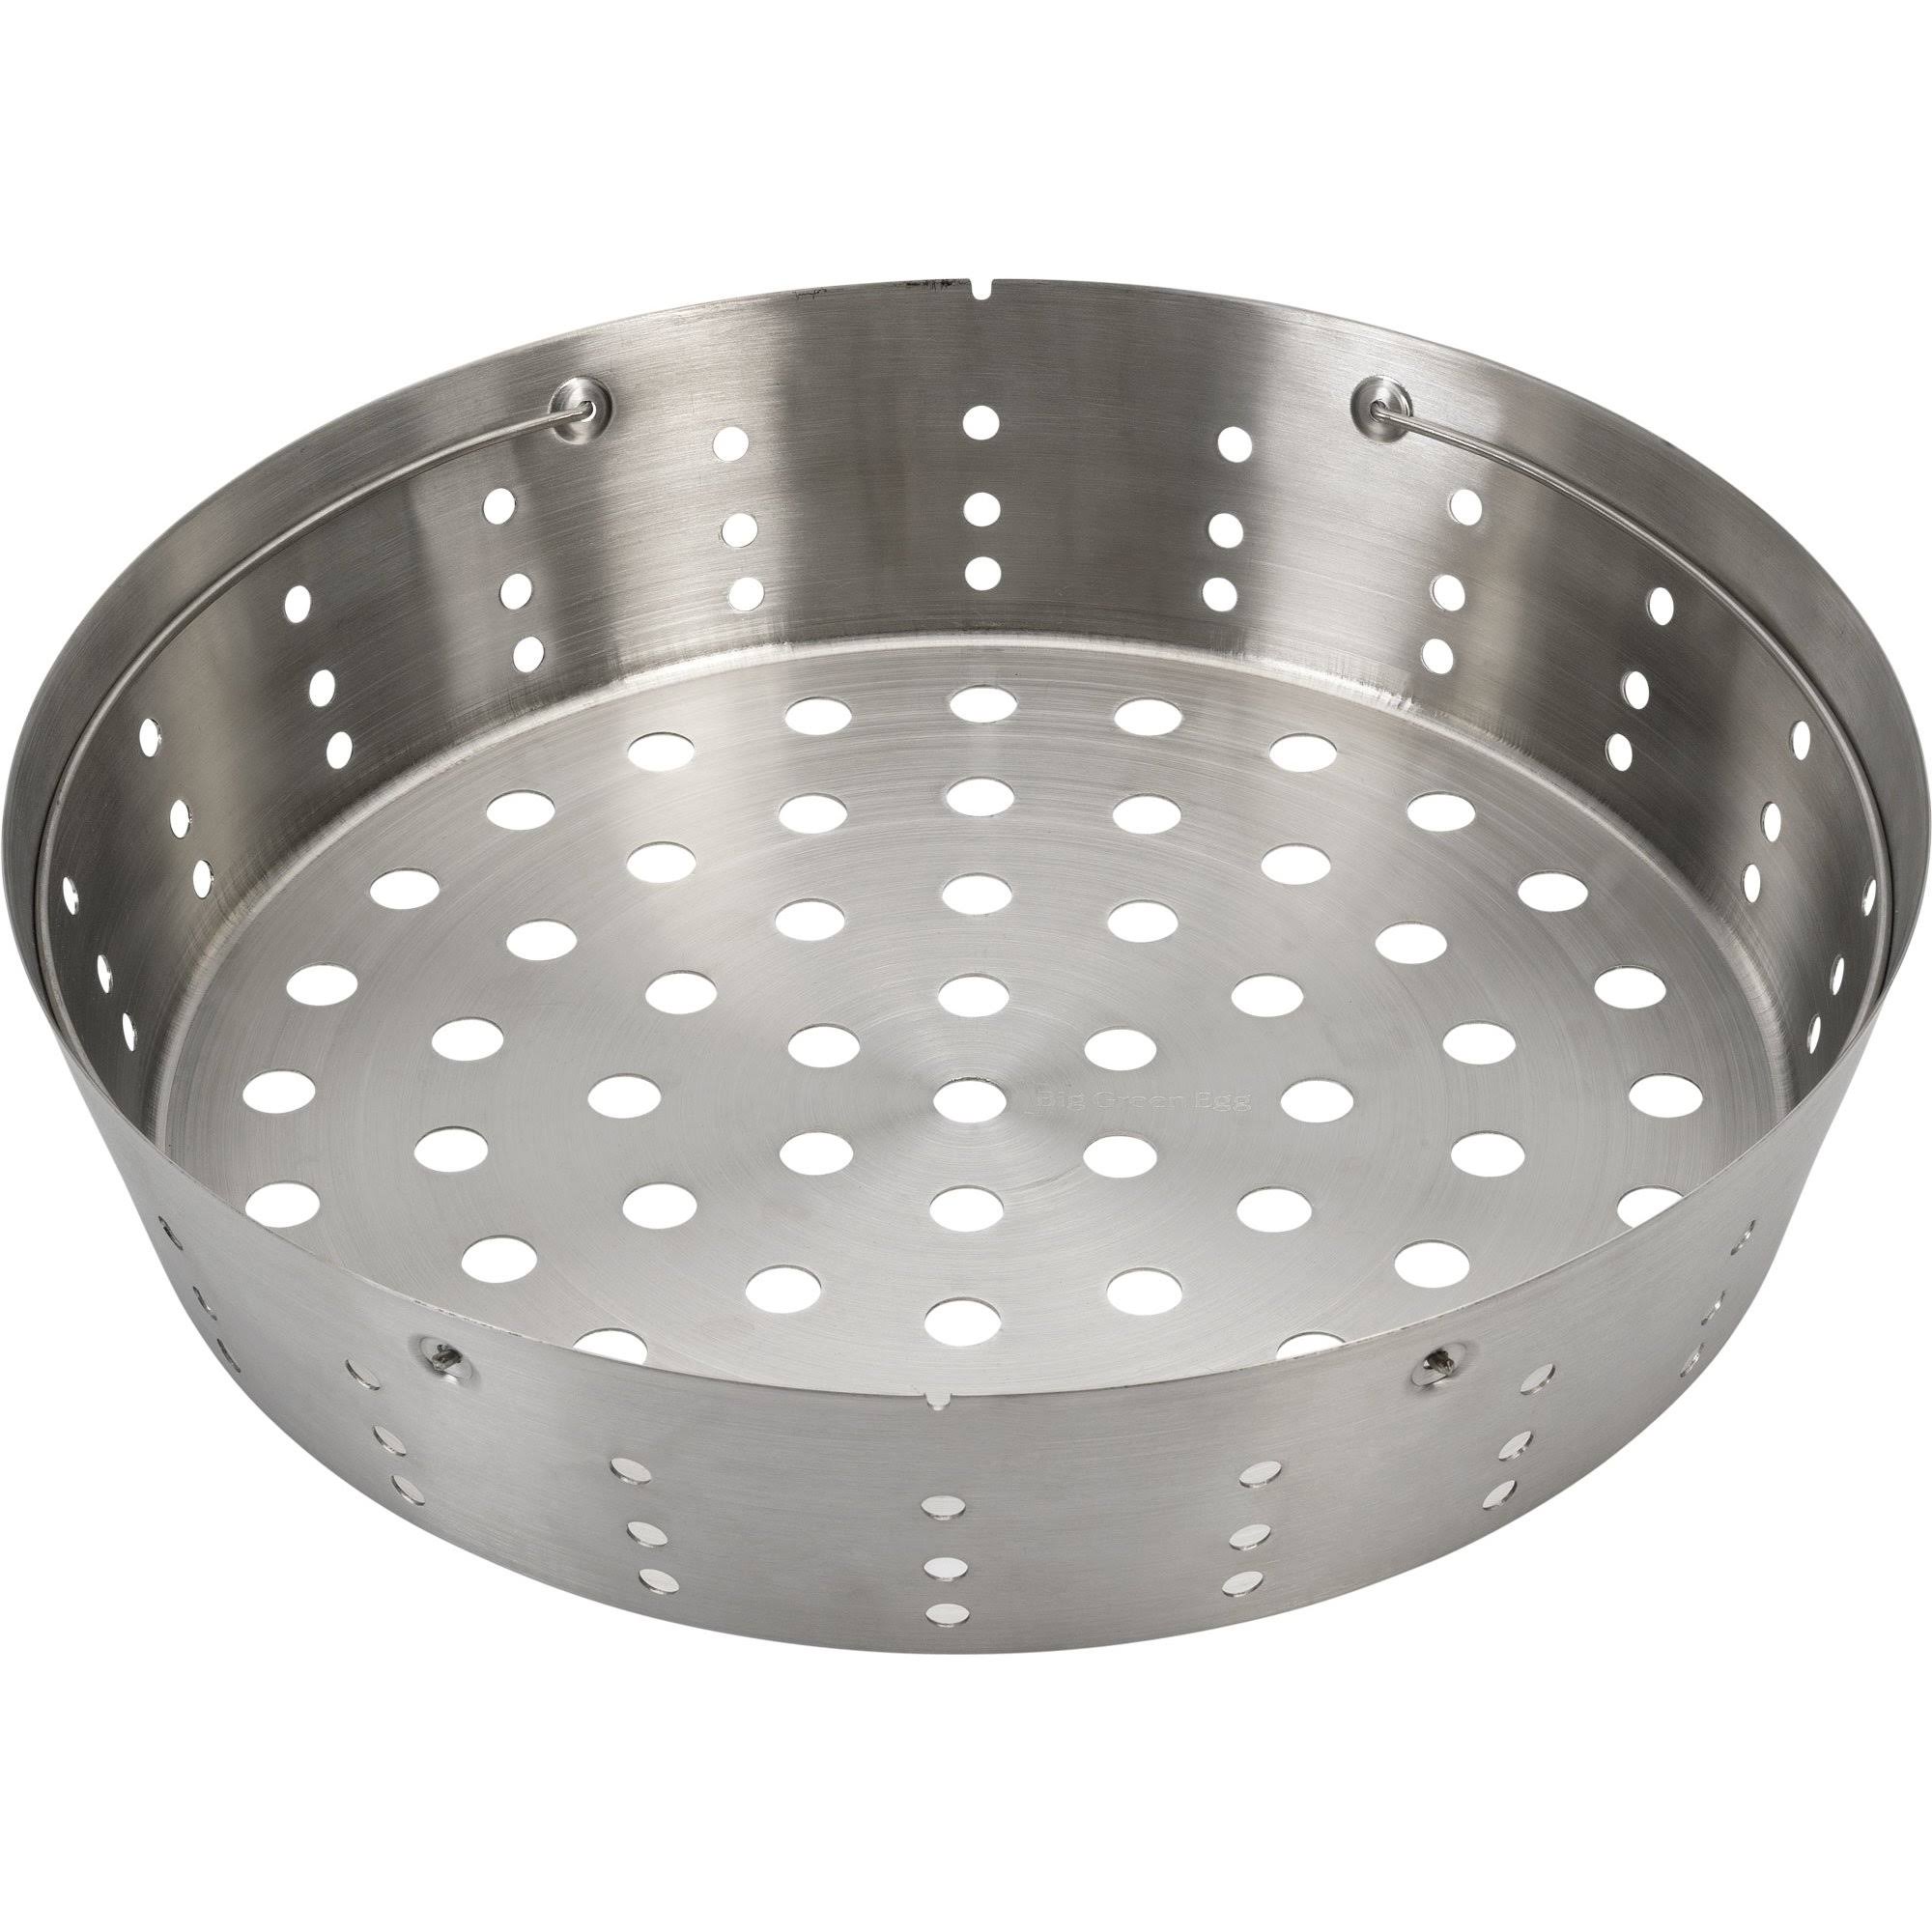 Big Green Egg Stainless Steel Fire Bowl for XL Egg